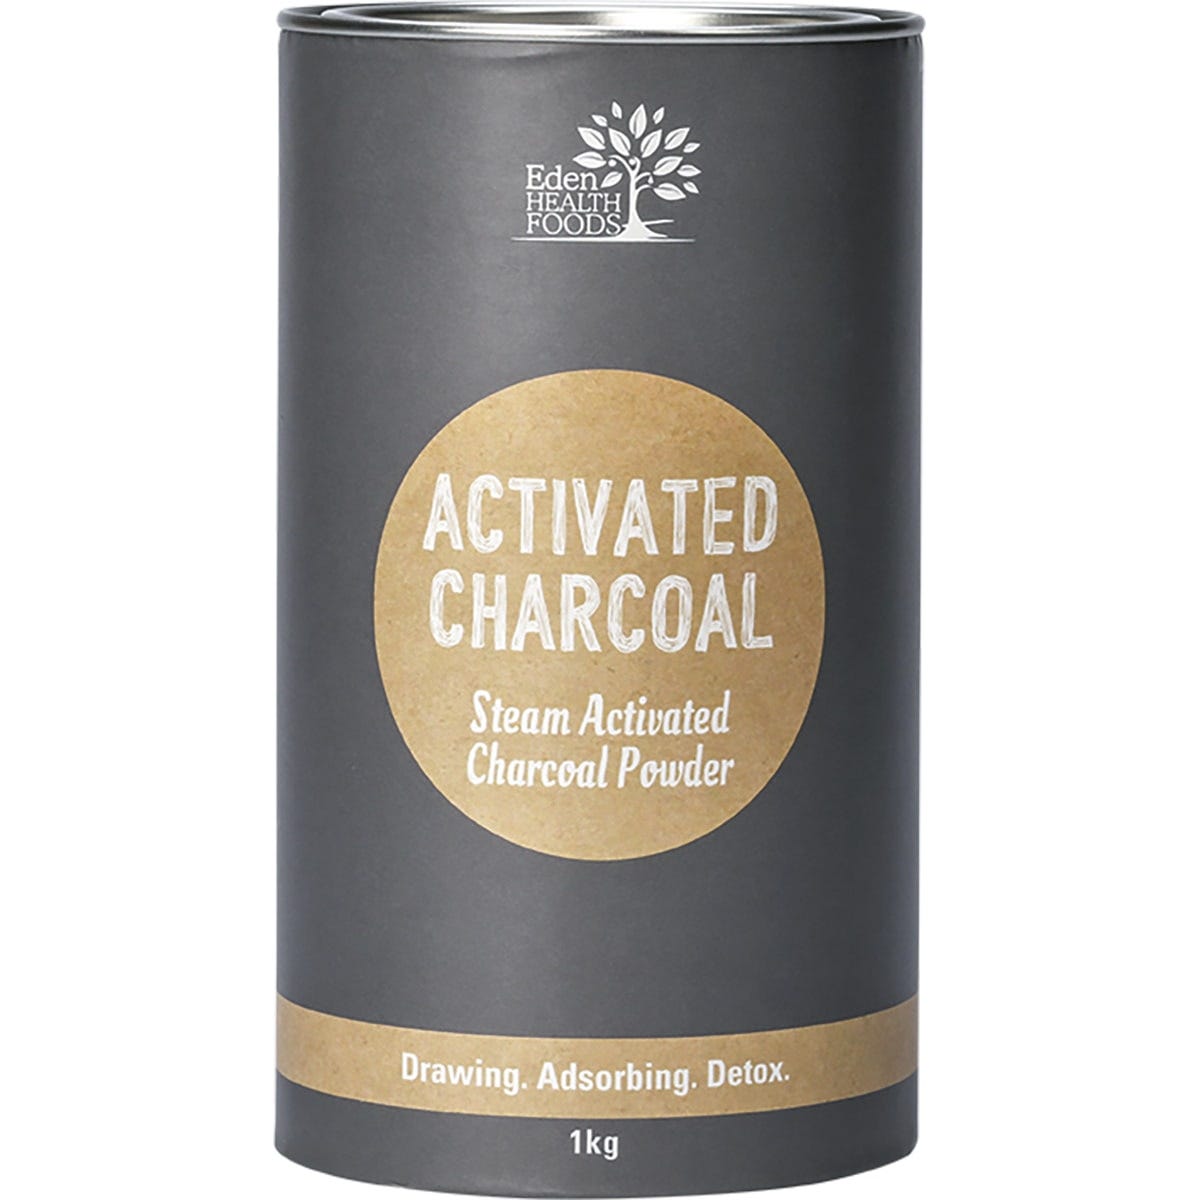 Activated Charcoal Steam Activated Charcoal Powder